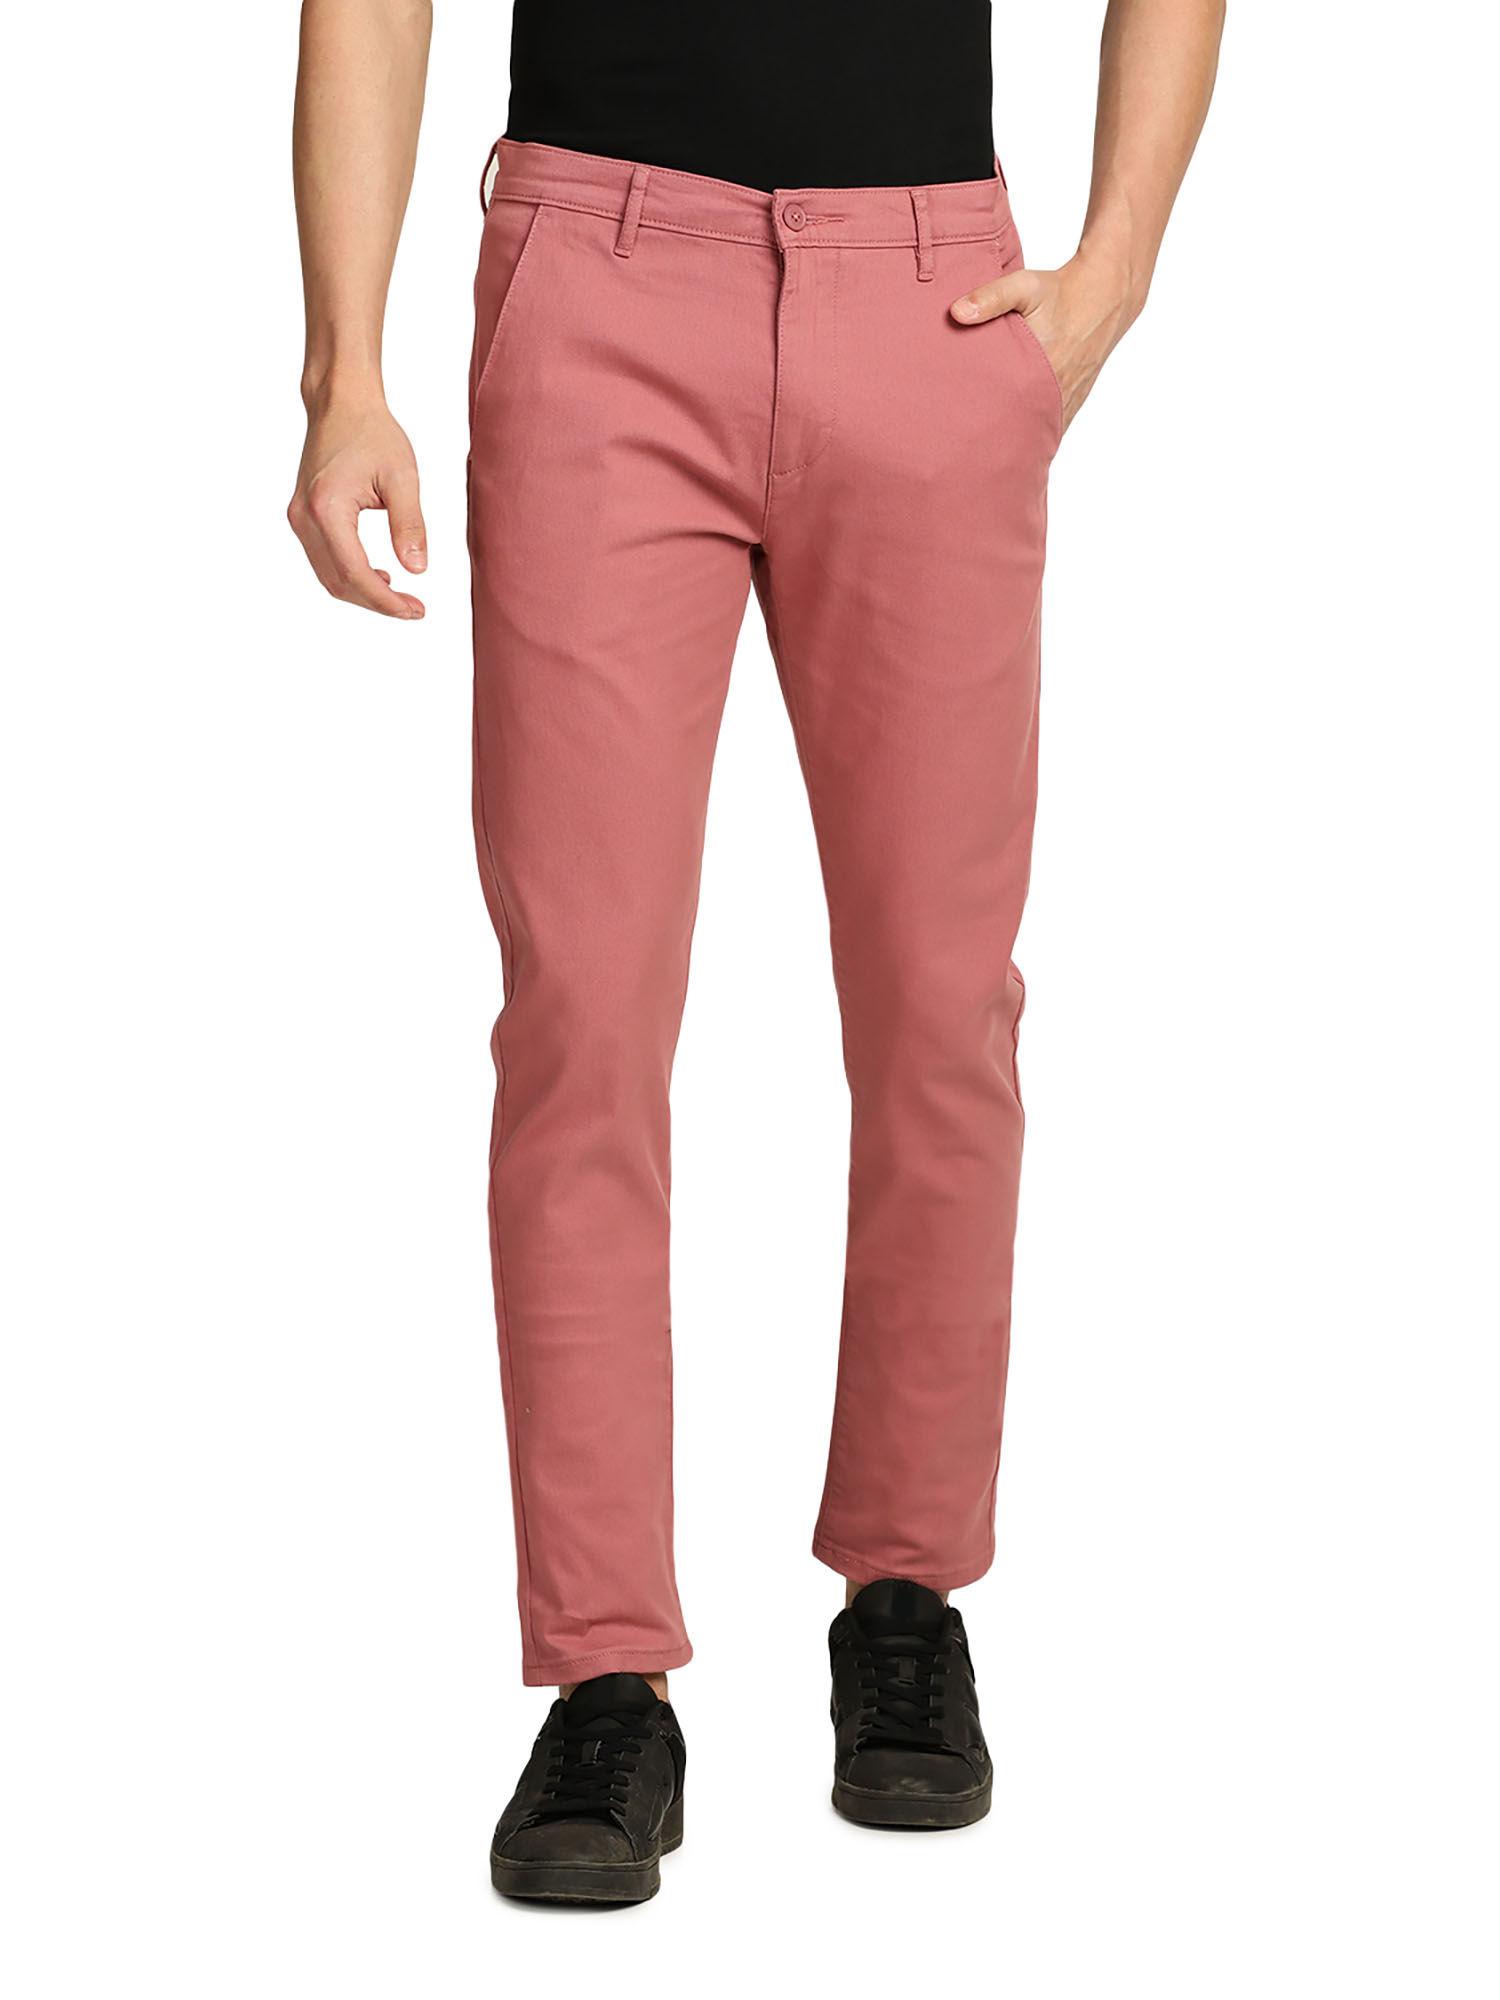 men's pink tapered trousers